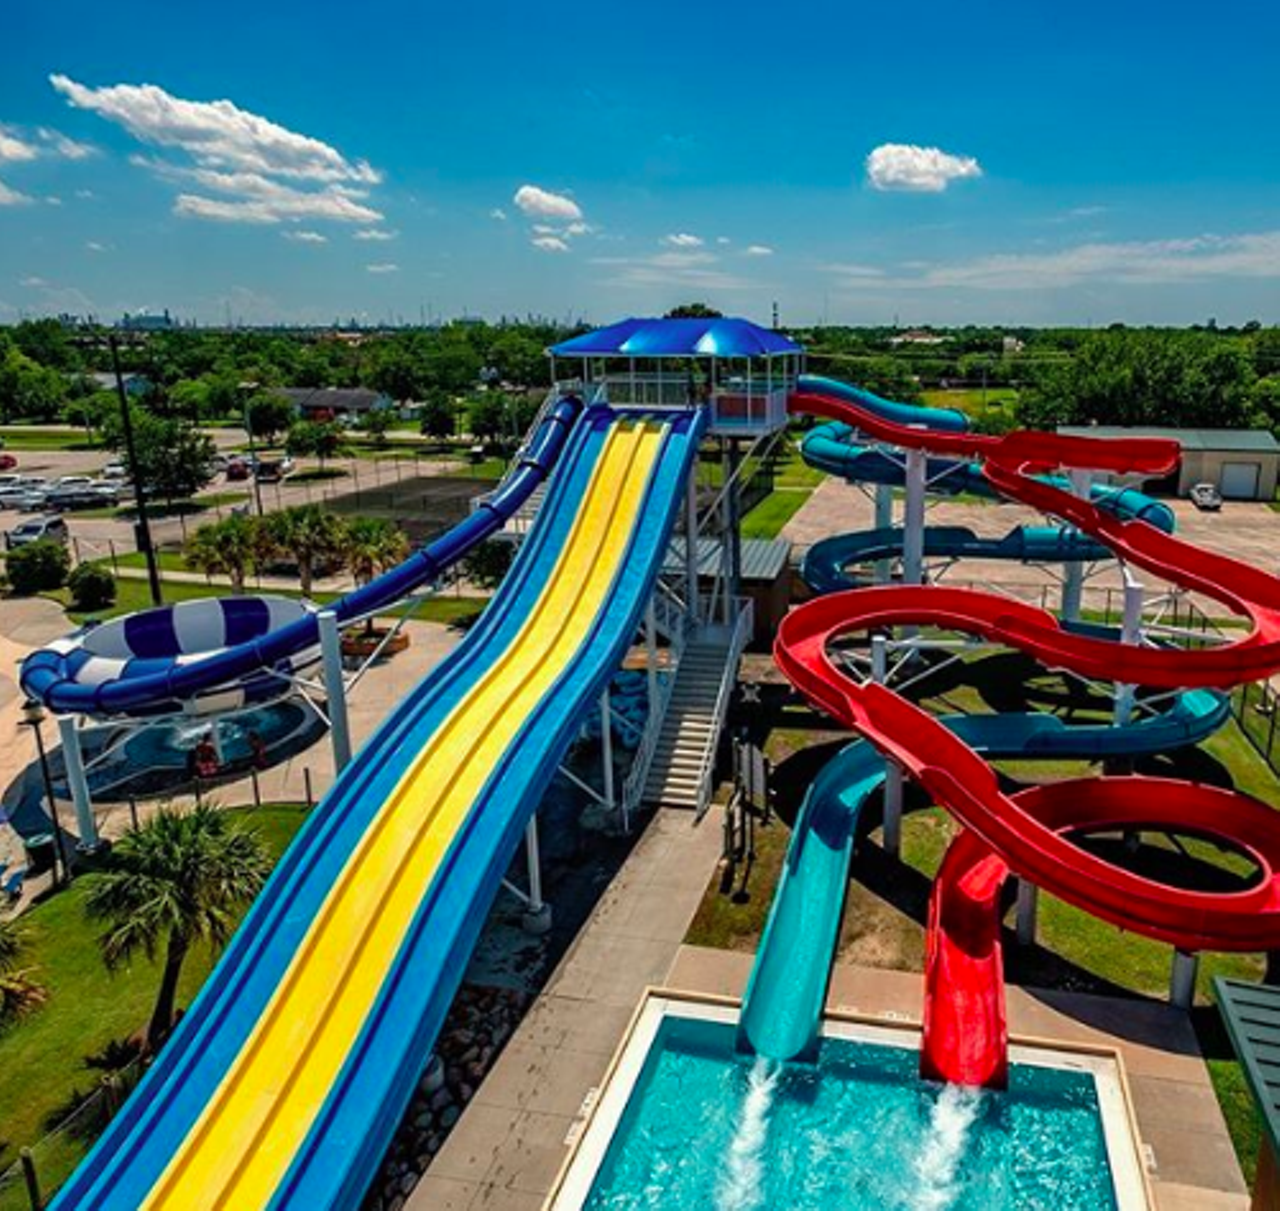 Pirate's Bay Water Park
5300 E Road, Baytown, (281) 422-1150, baytown.org
Thankfully open for the season, Pirate’s Bay grants you access to an abundance of water slides, wave pools, a lazy river and designated areas for the kids to play! Everyone who packs it into the car will be glad they made the trip out ot Baytown.
Photo via Instagram / tuberides